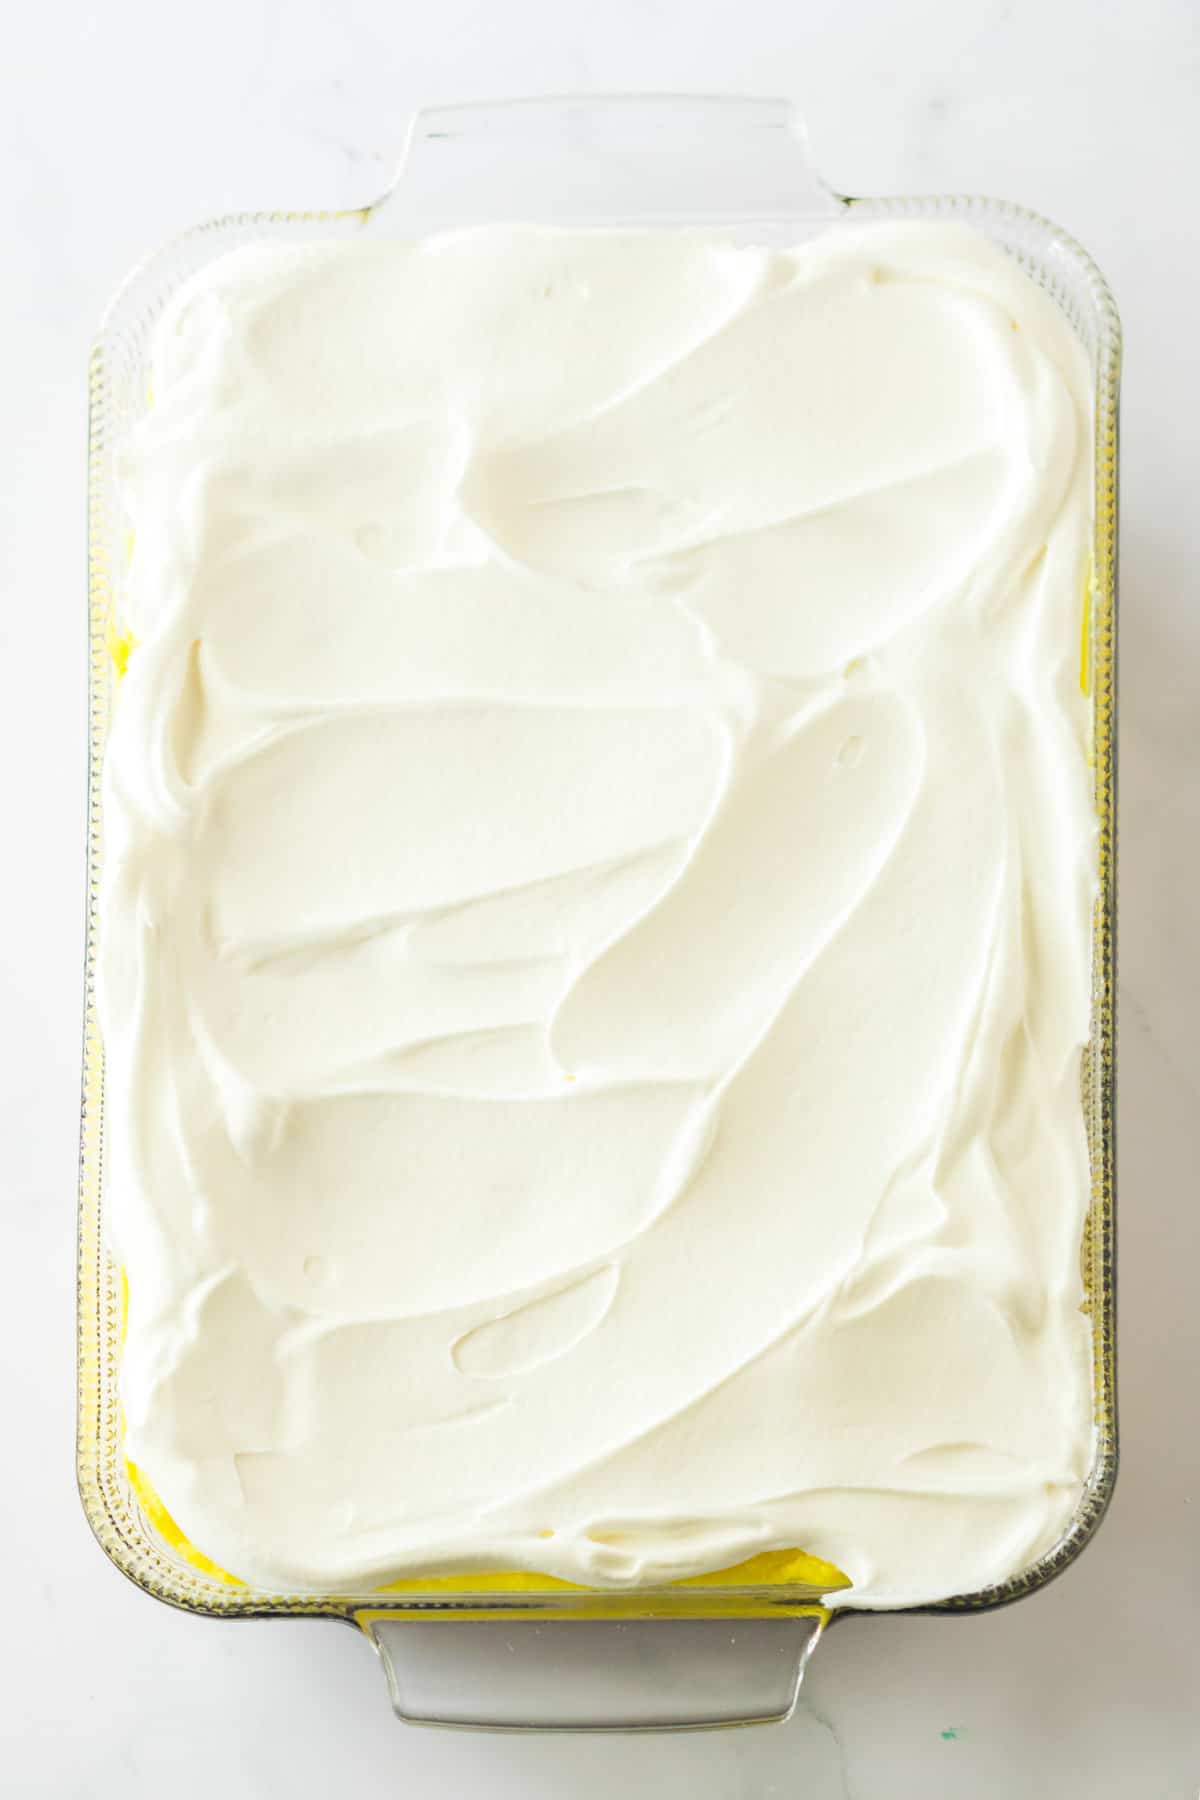 Whipped topping spread into an even layer in a rectangular glass dish.